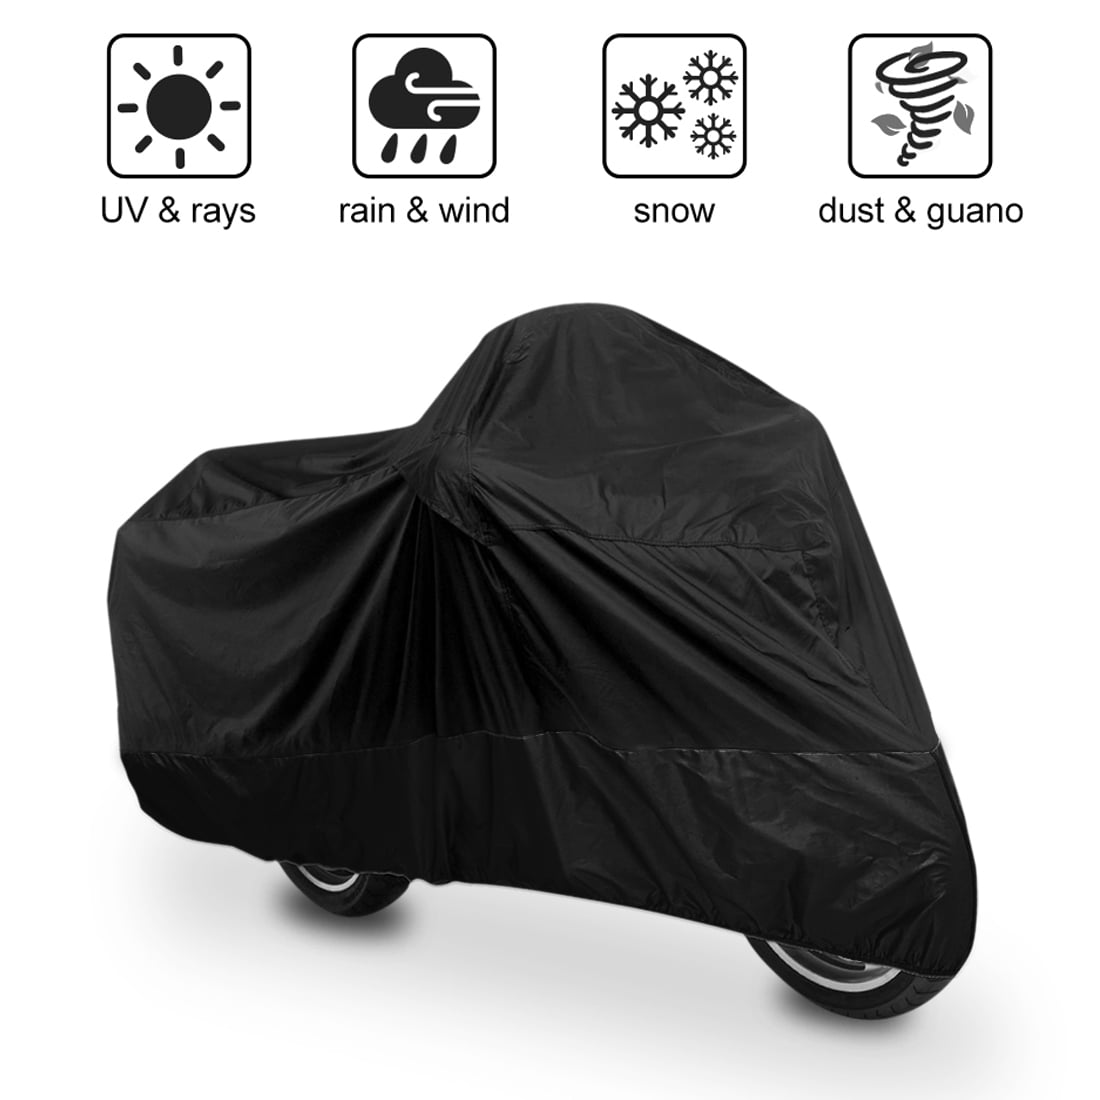 Y2 HARLEY Road Glide NEW ALL BLACK Motorcycle Cover CQ 